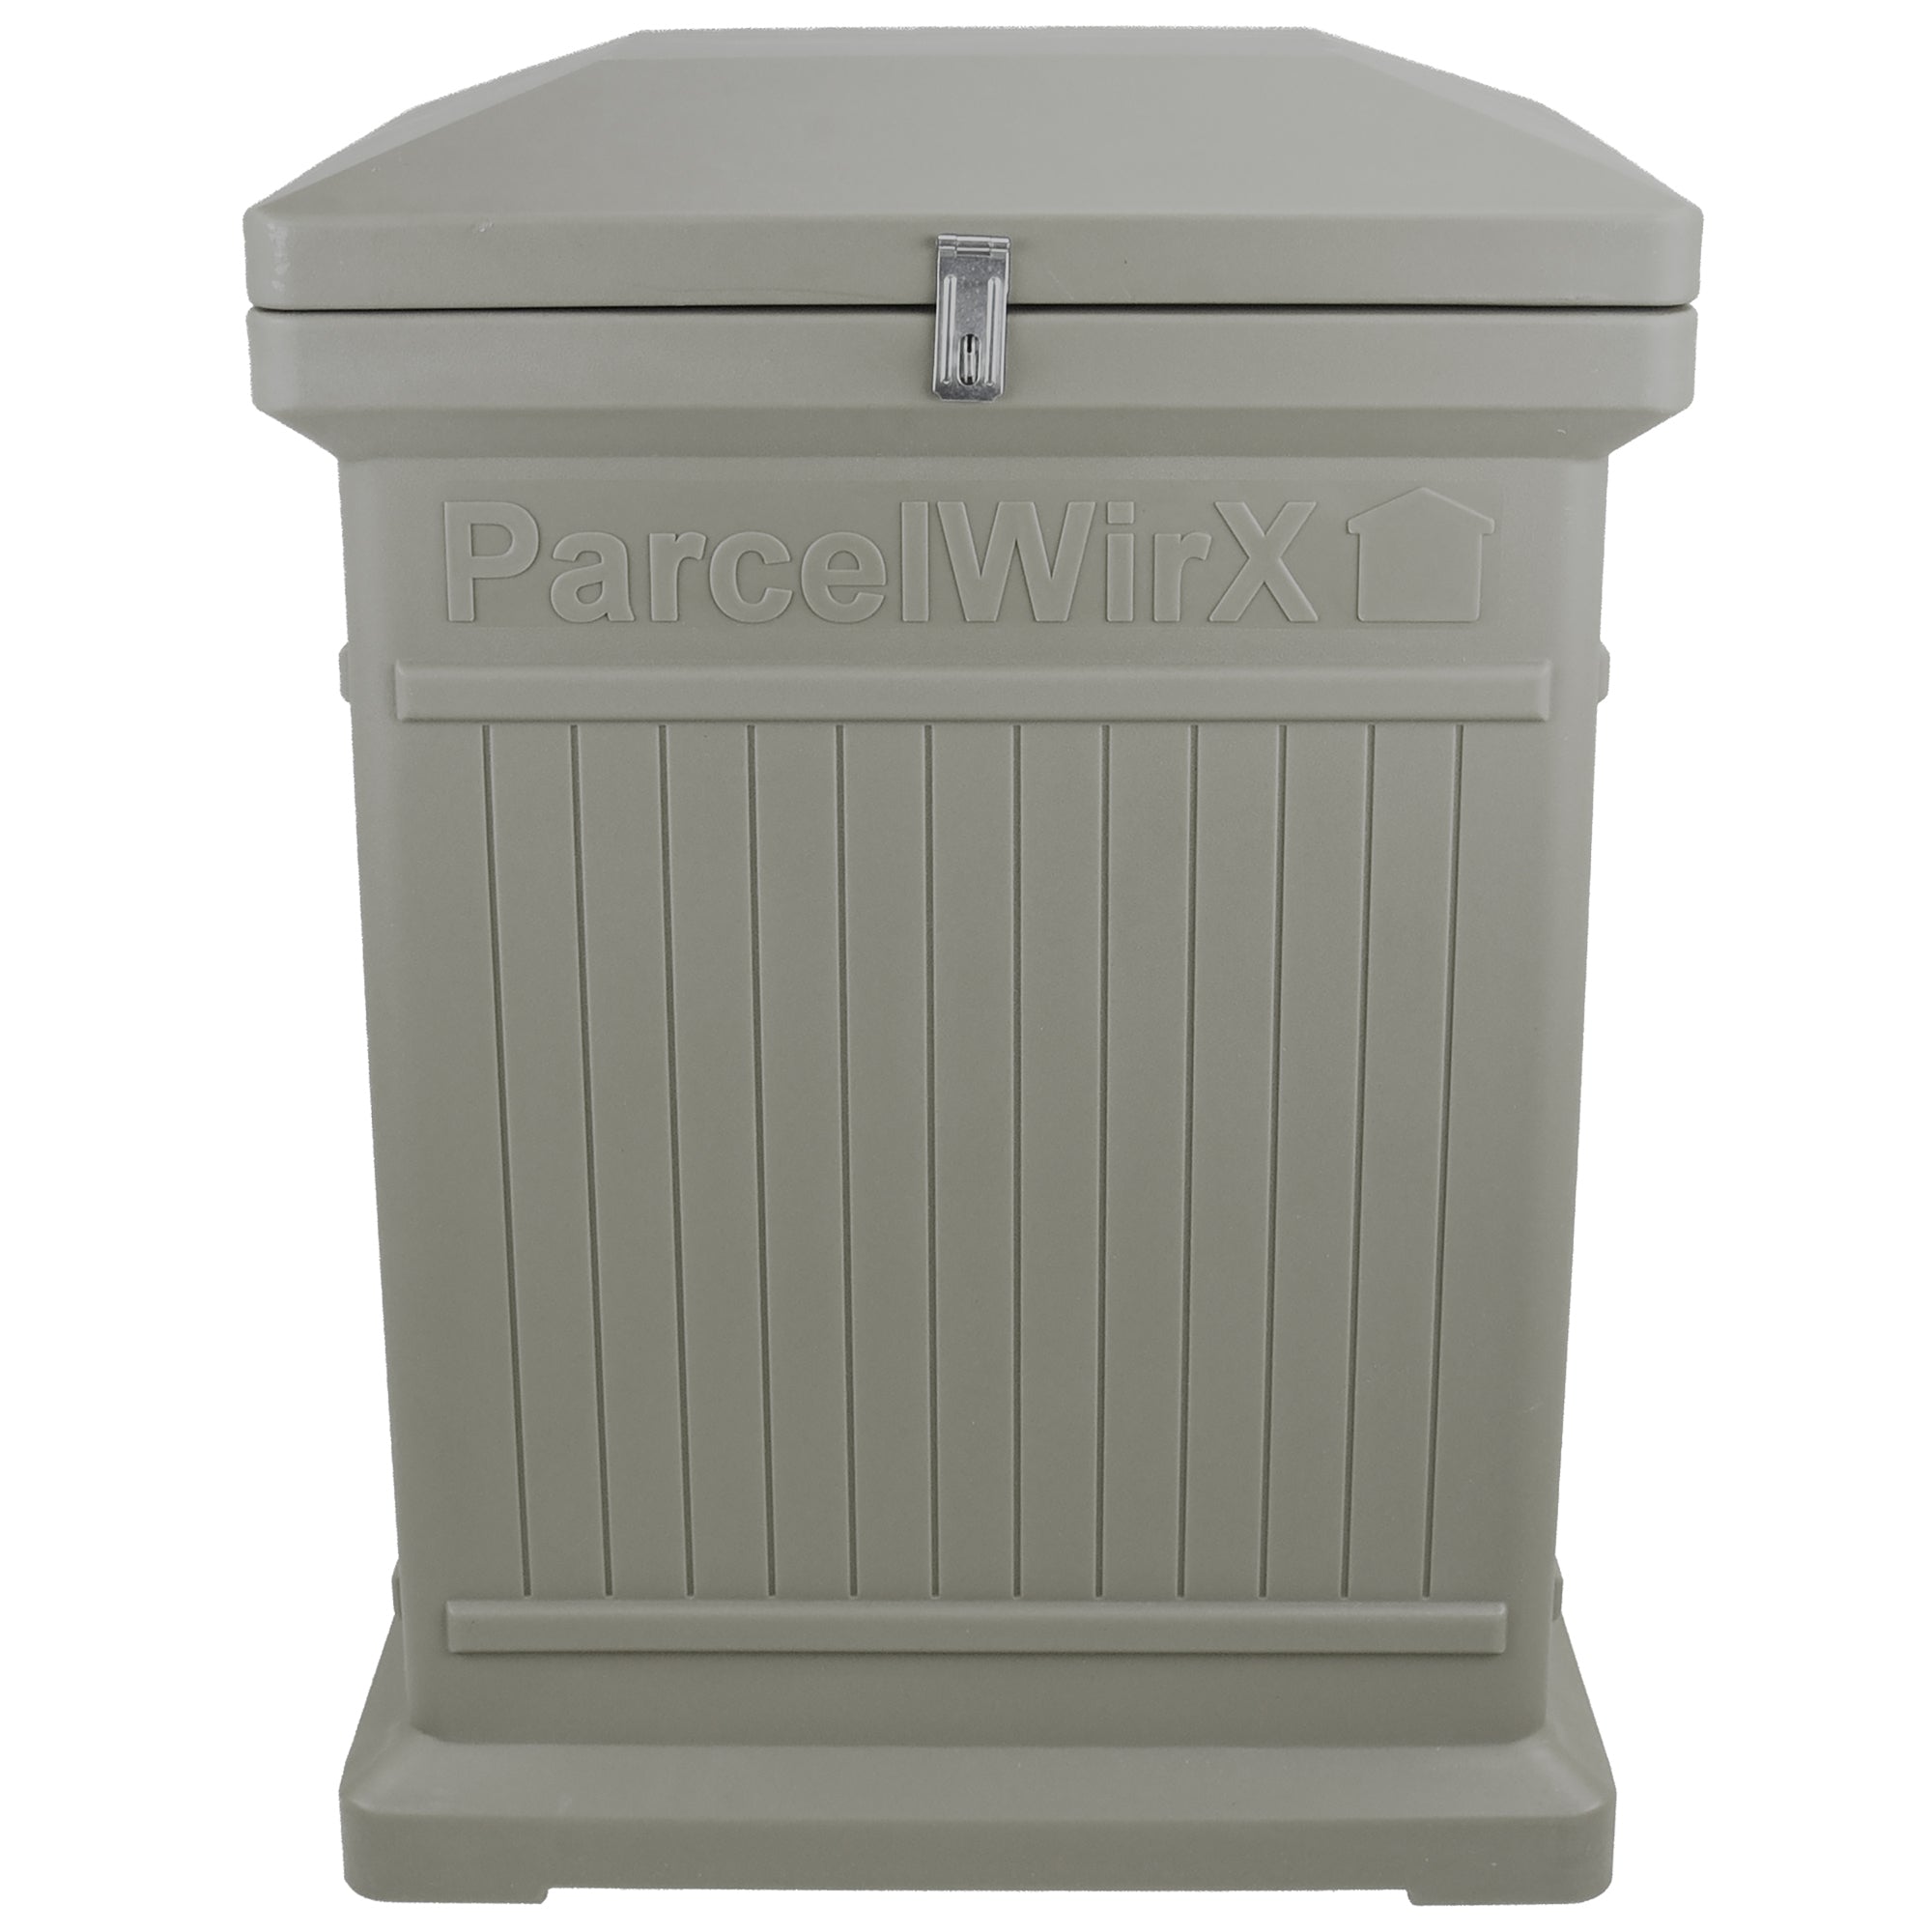 ParcelWirx premium vertical dropbox in prestige pewter from the front on white background